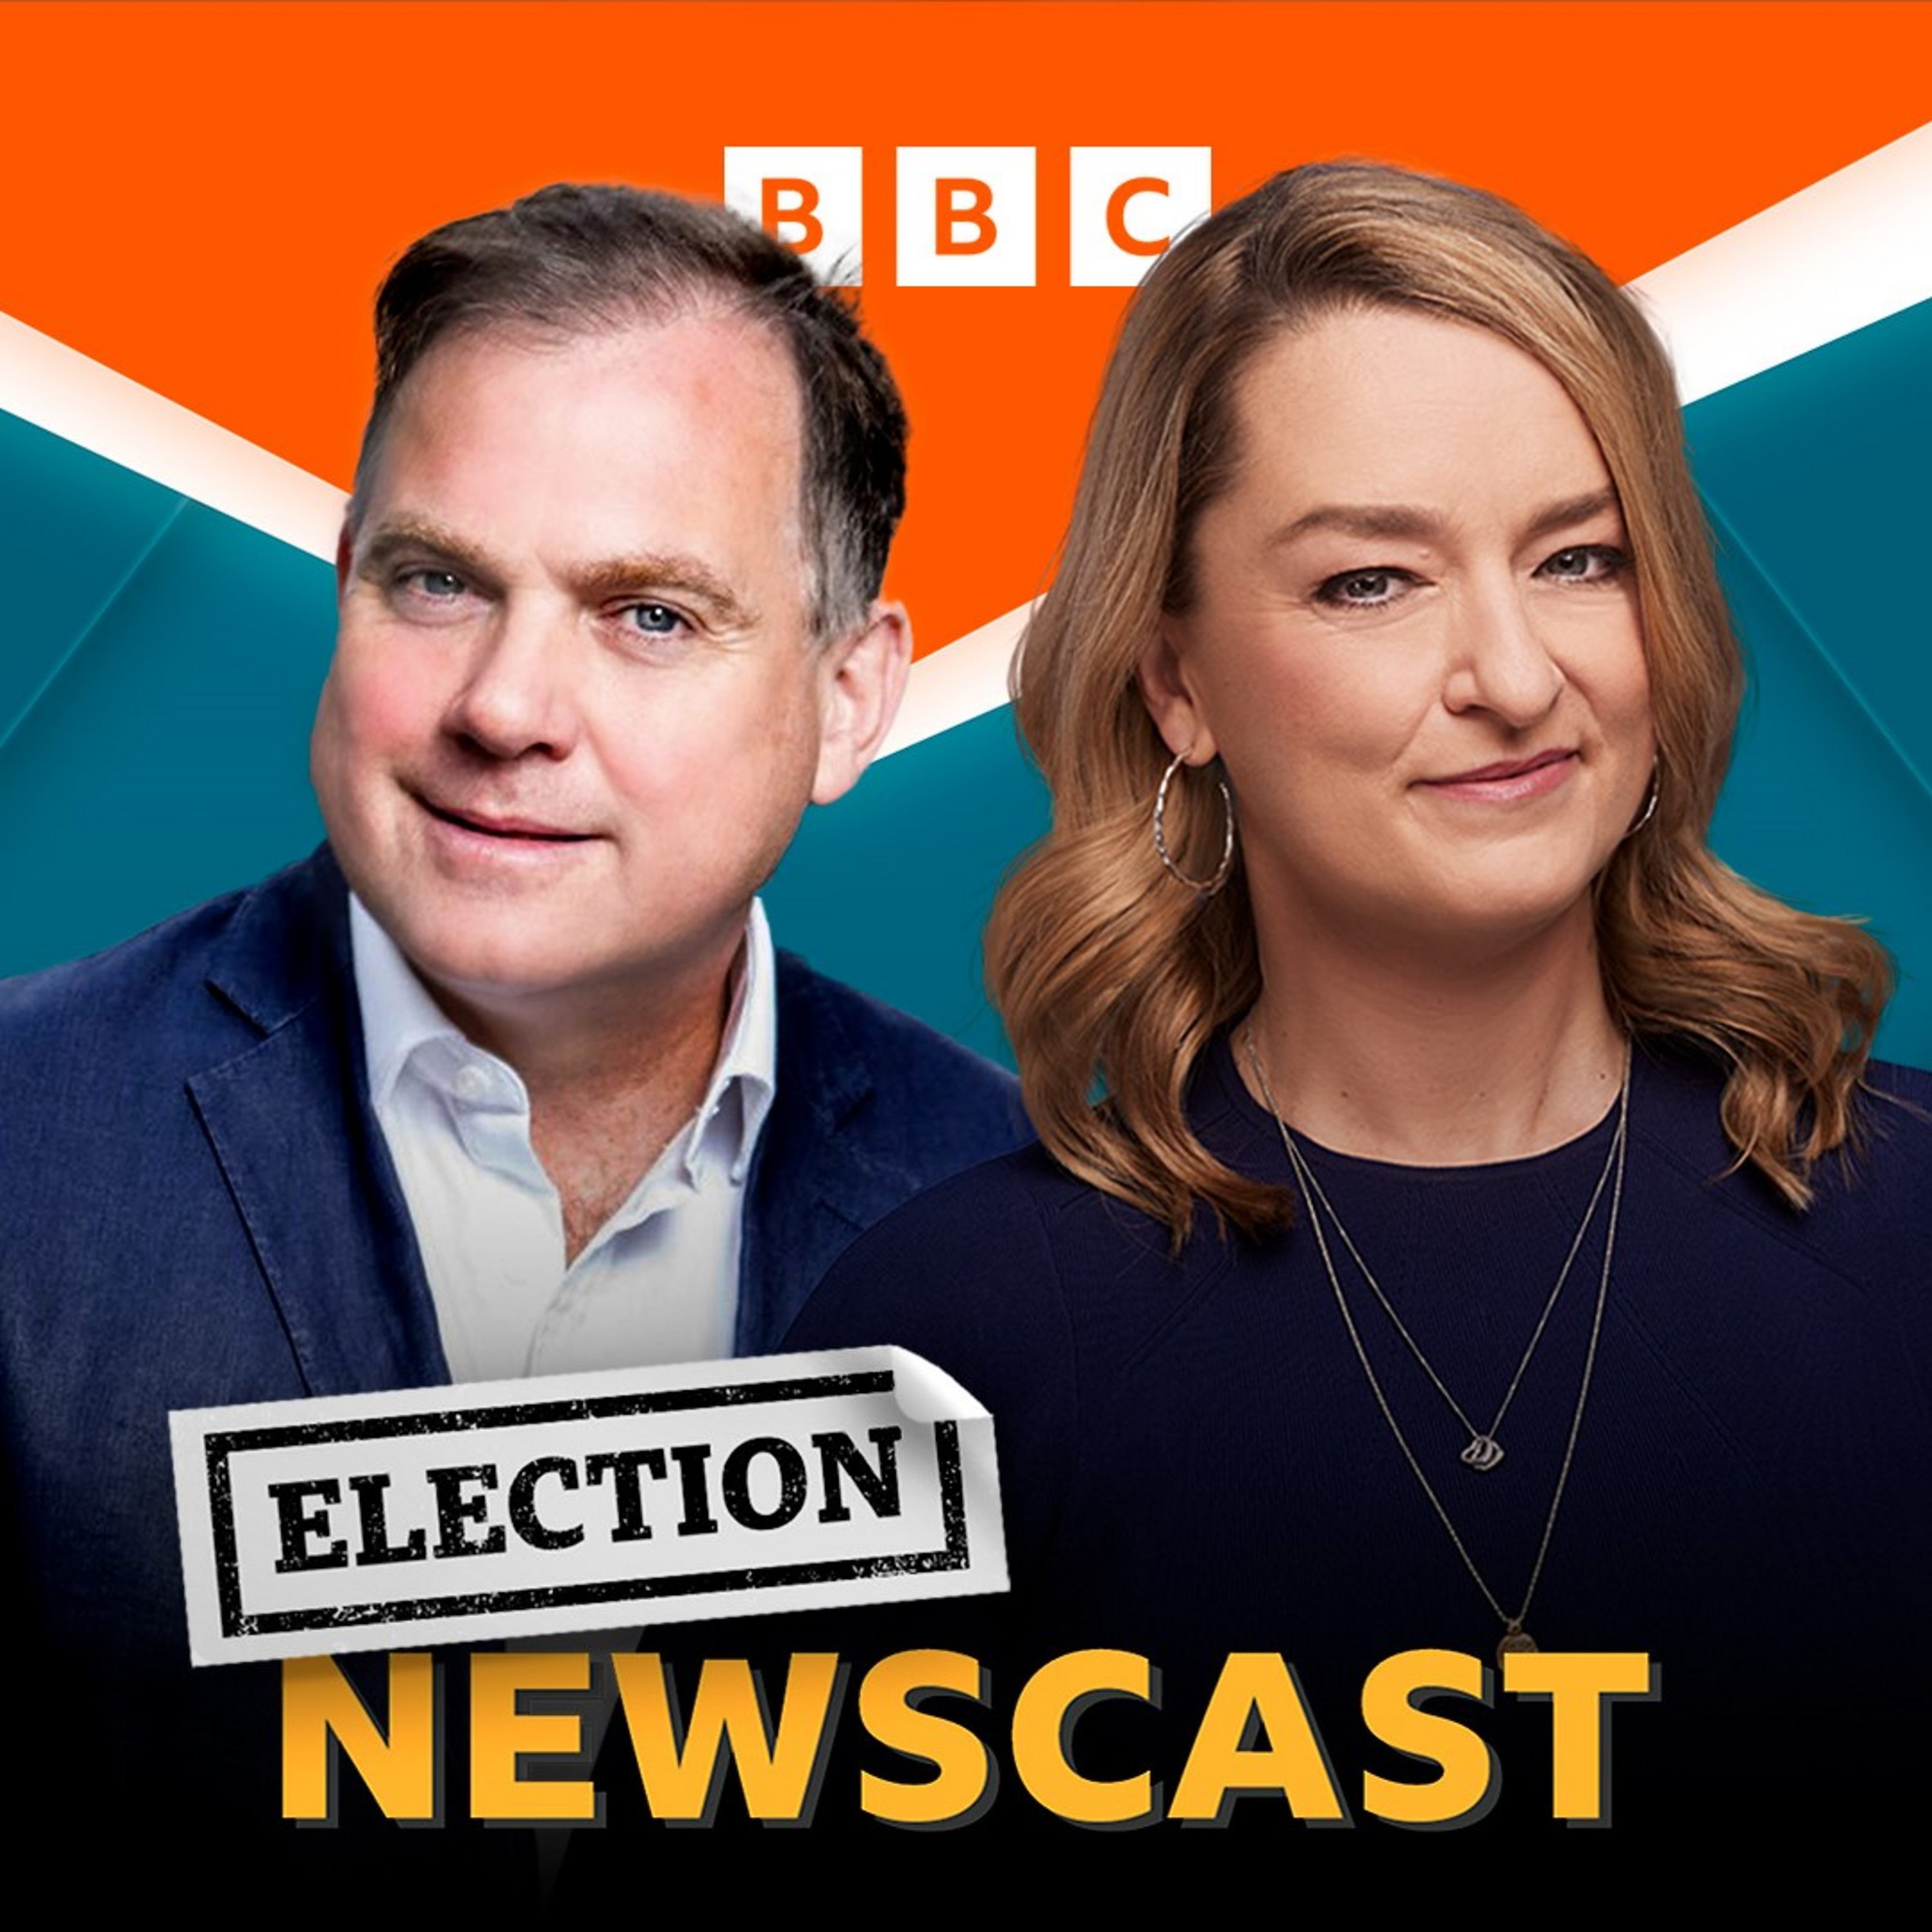 Electioncast: Rwanda policy 'is crap’ says Tory candidate